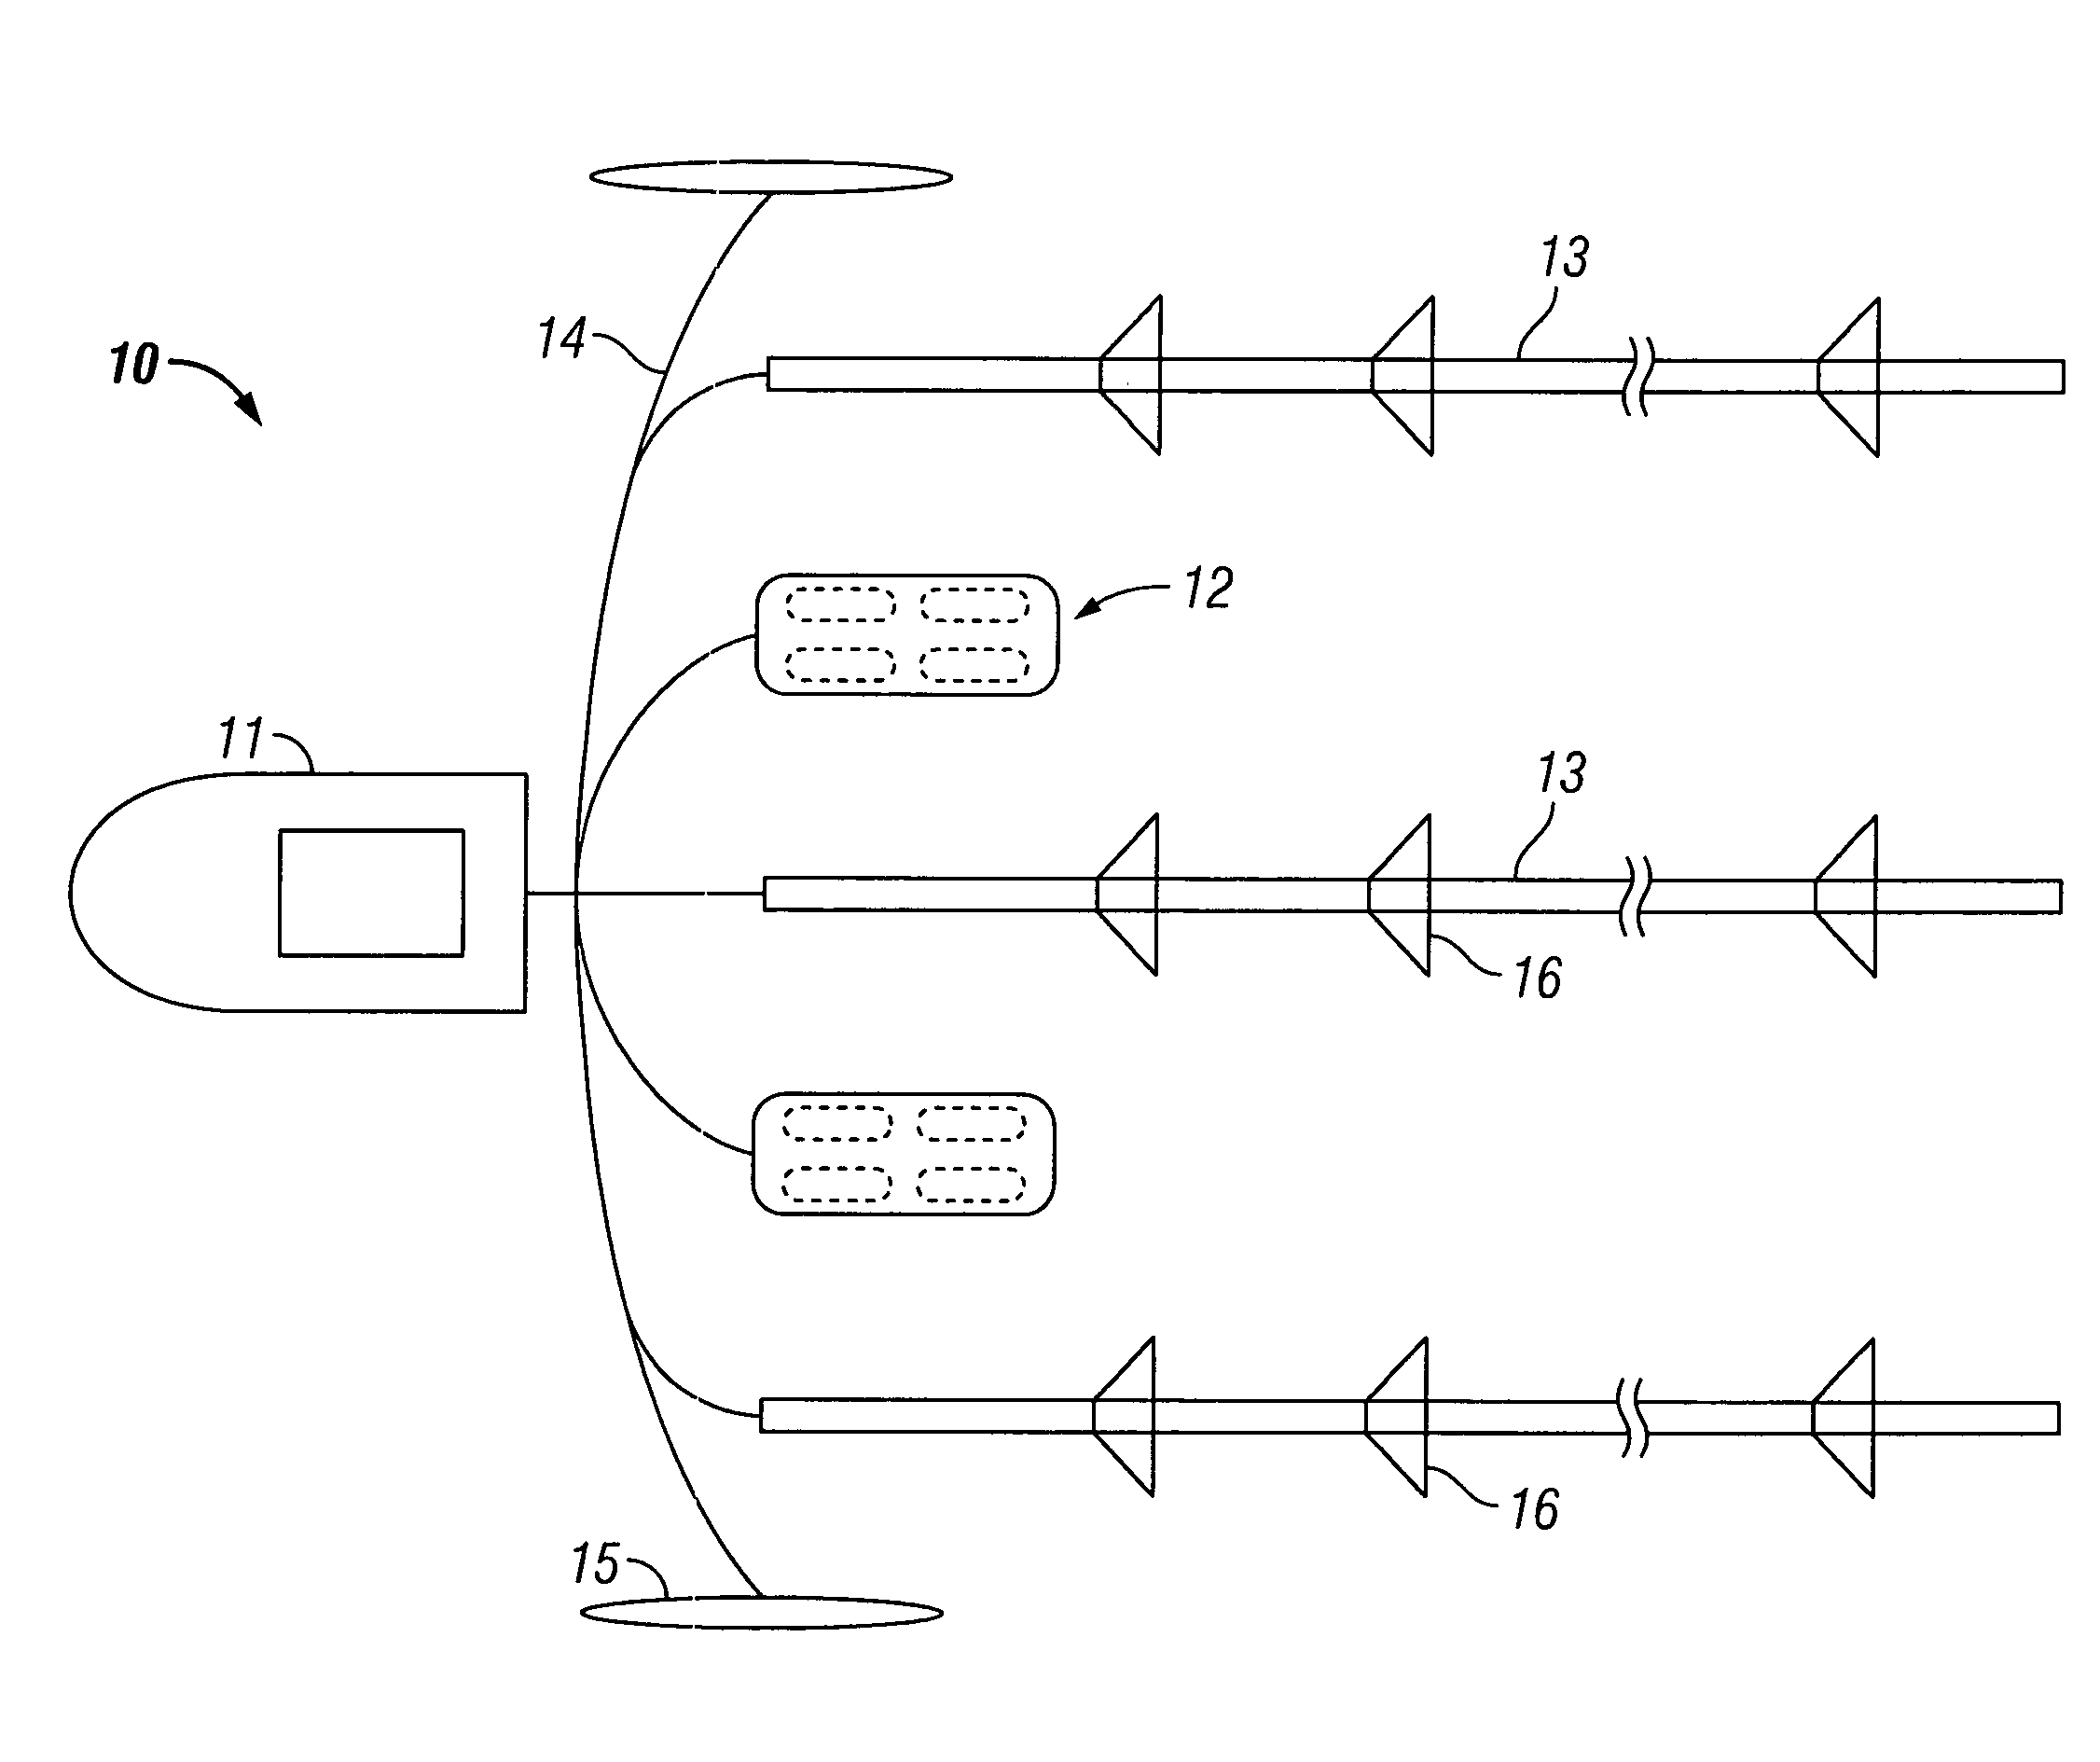 System and method for using copper coating to prevent marine growth on towed geophysical equipment